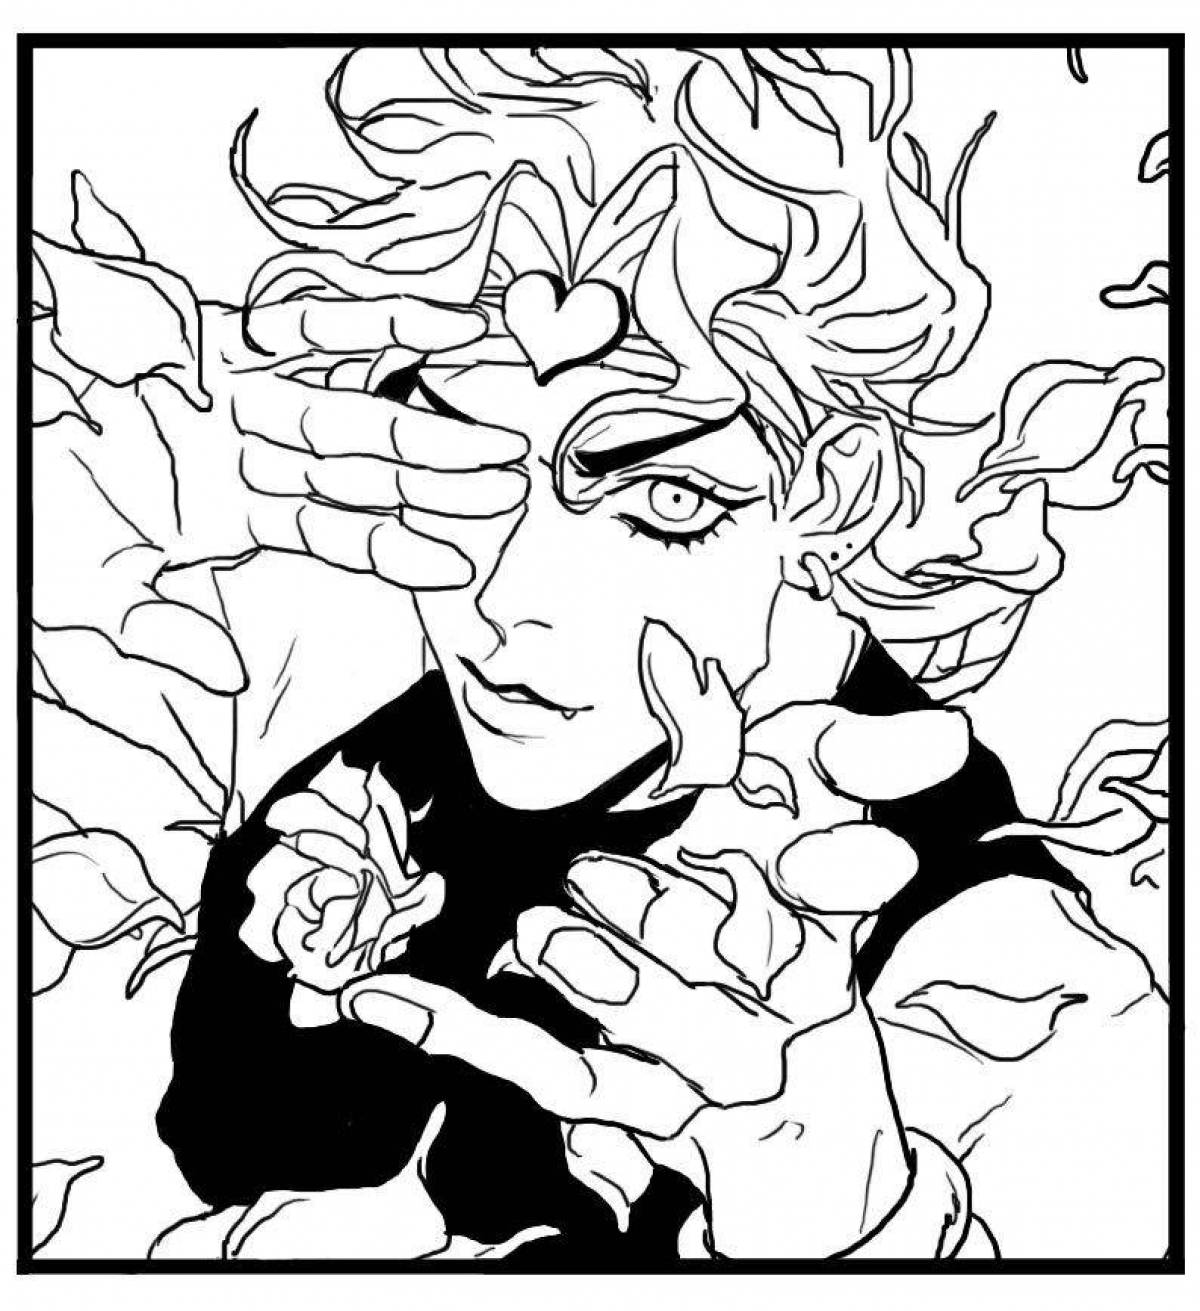 Jojo dio's awesome coloring book